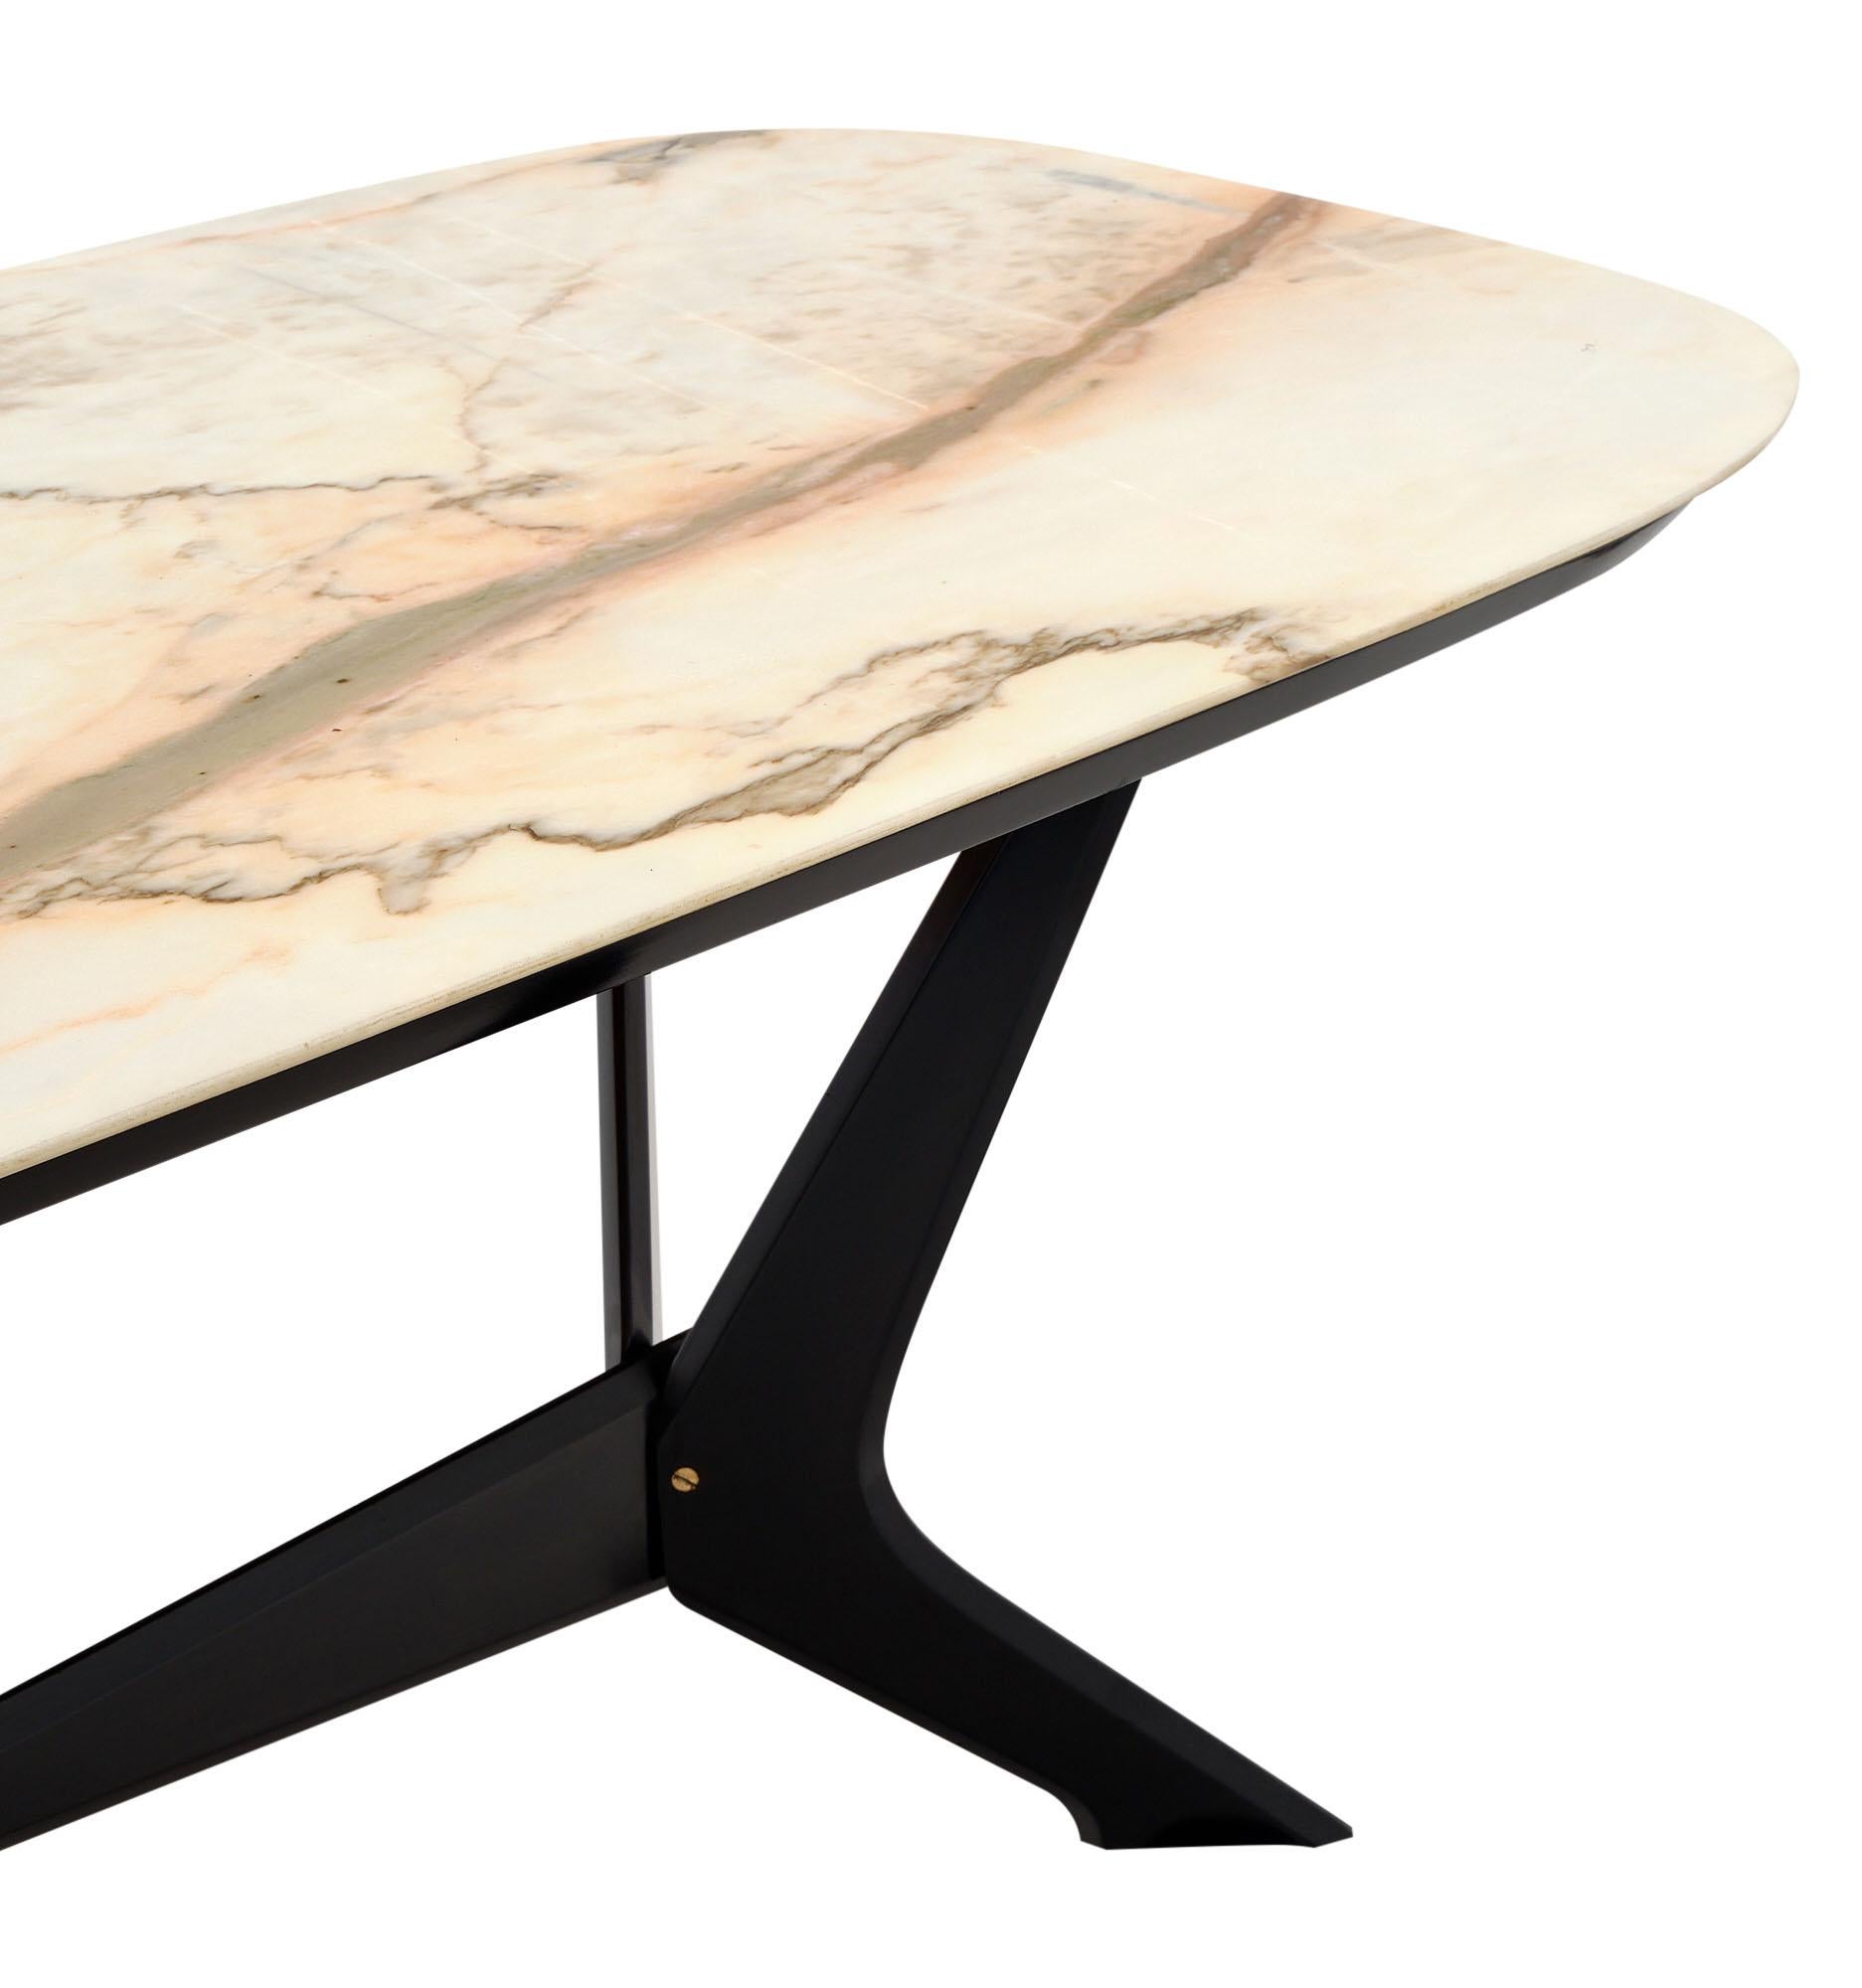 Mid-20th Century Italian Modernist Dining Table Attributed to Ico Parisi For Sale